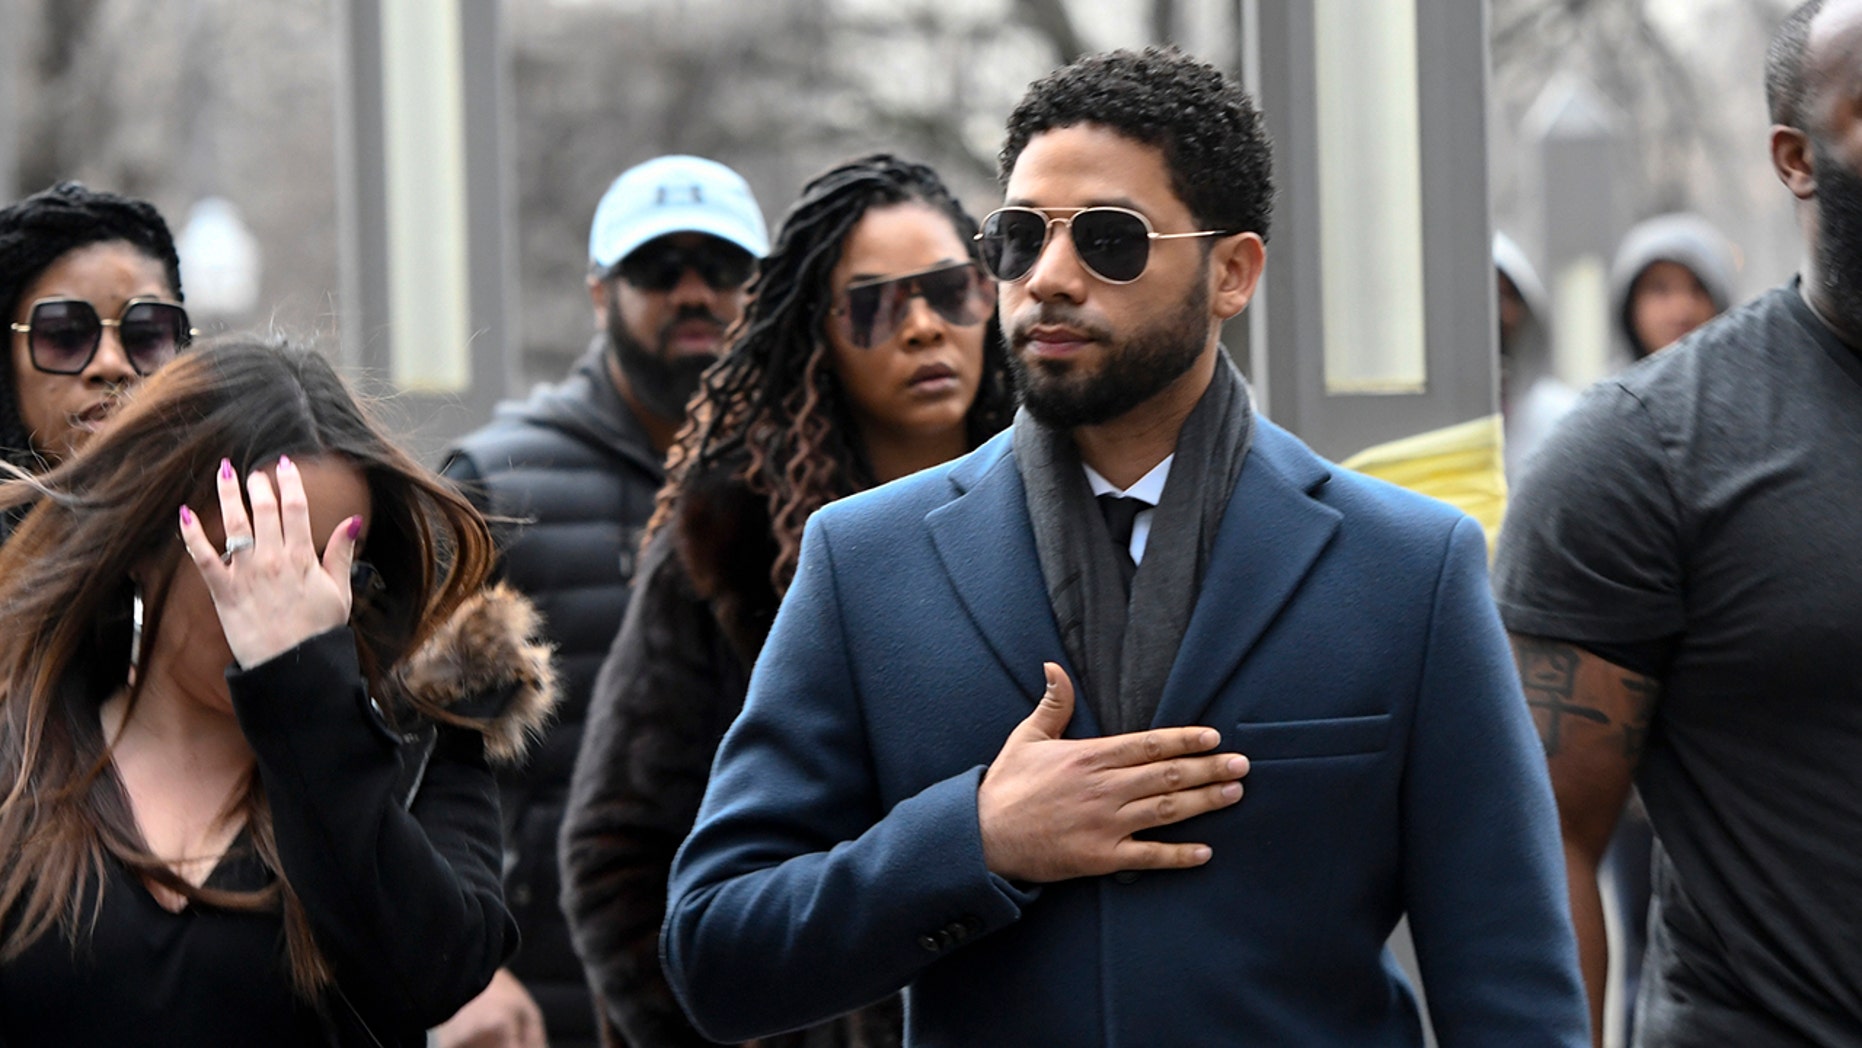 Jussie Smollett, who fooled the media and faced the backlash, beats the system | Fox News